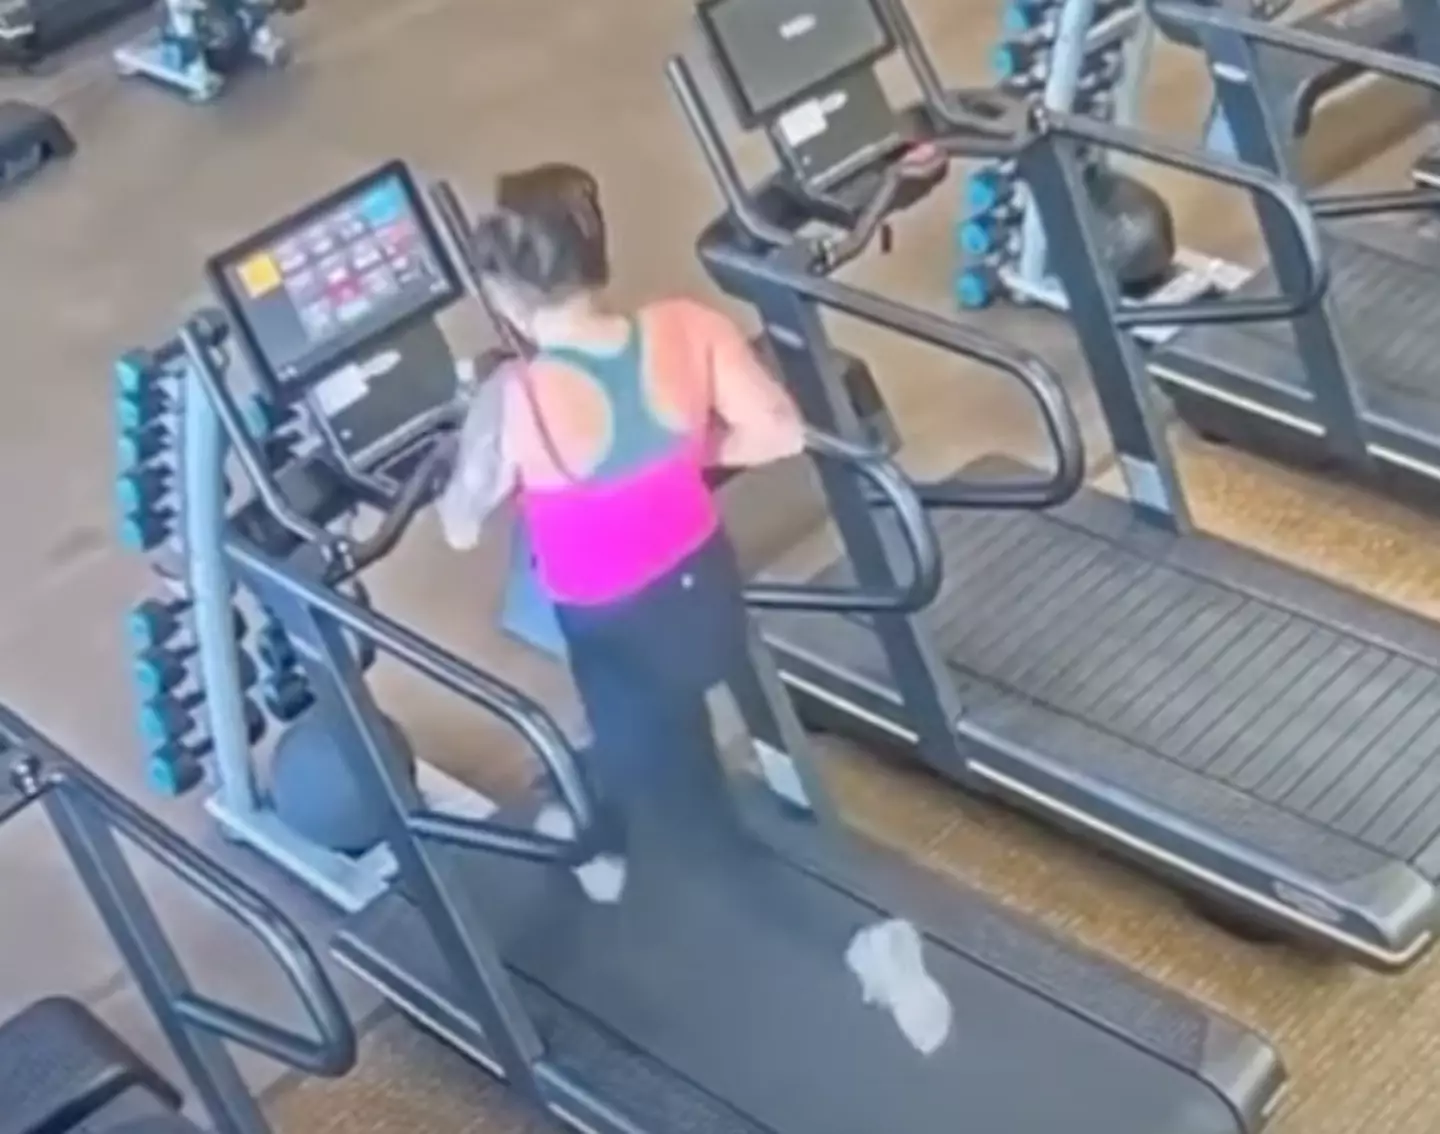 Next time you need an excuse not to go to the gym, just watch this.